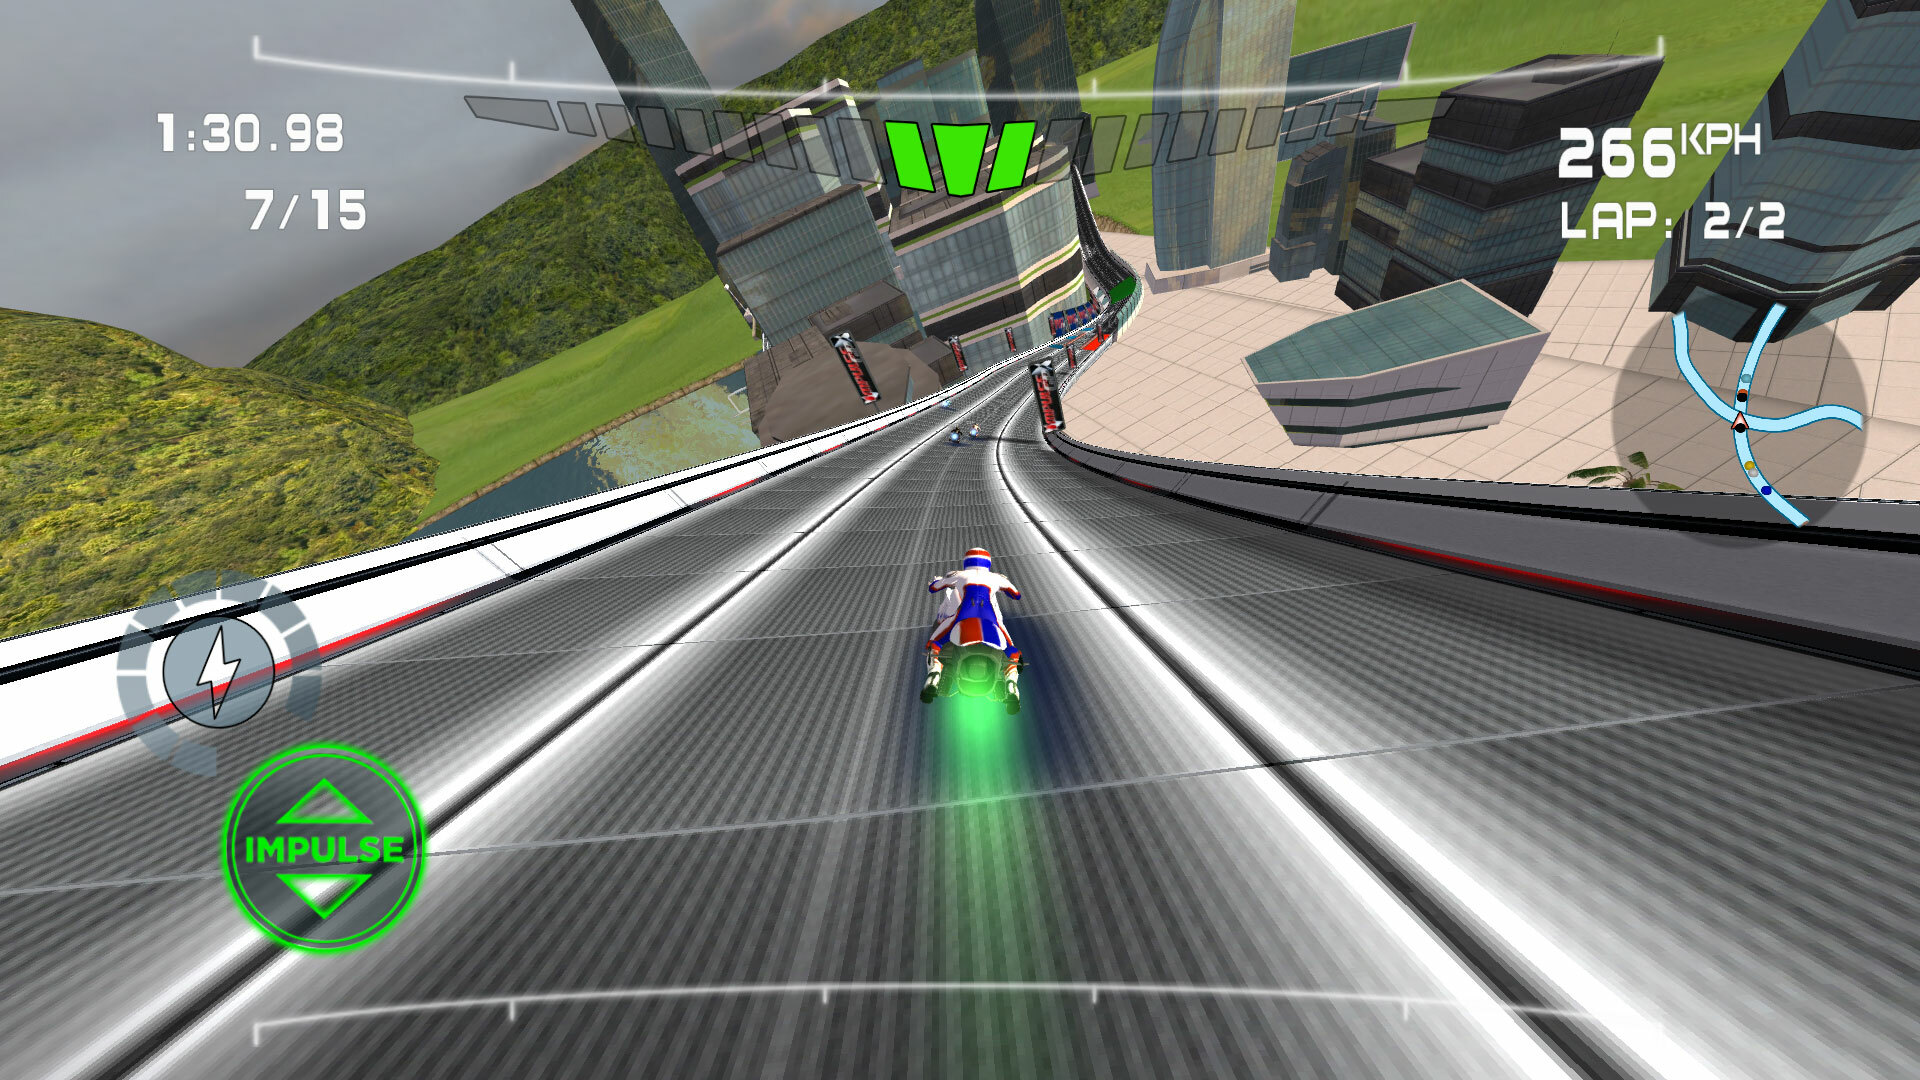 The best racing game for Apple TV: Impulse GP